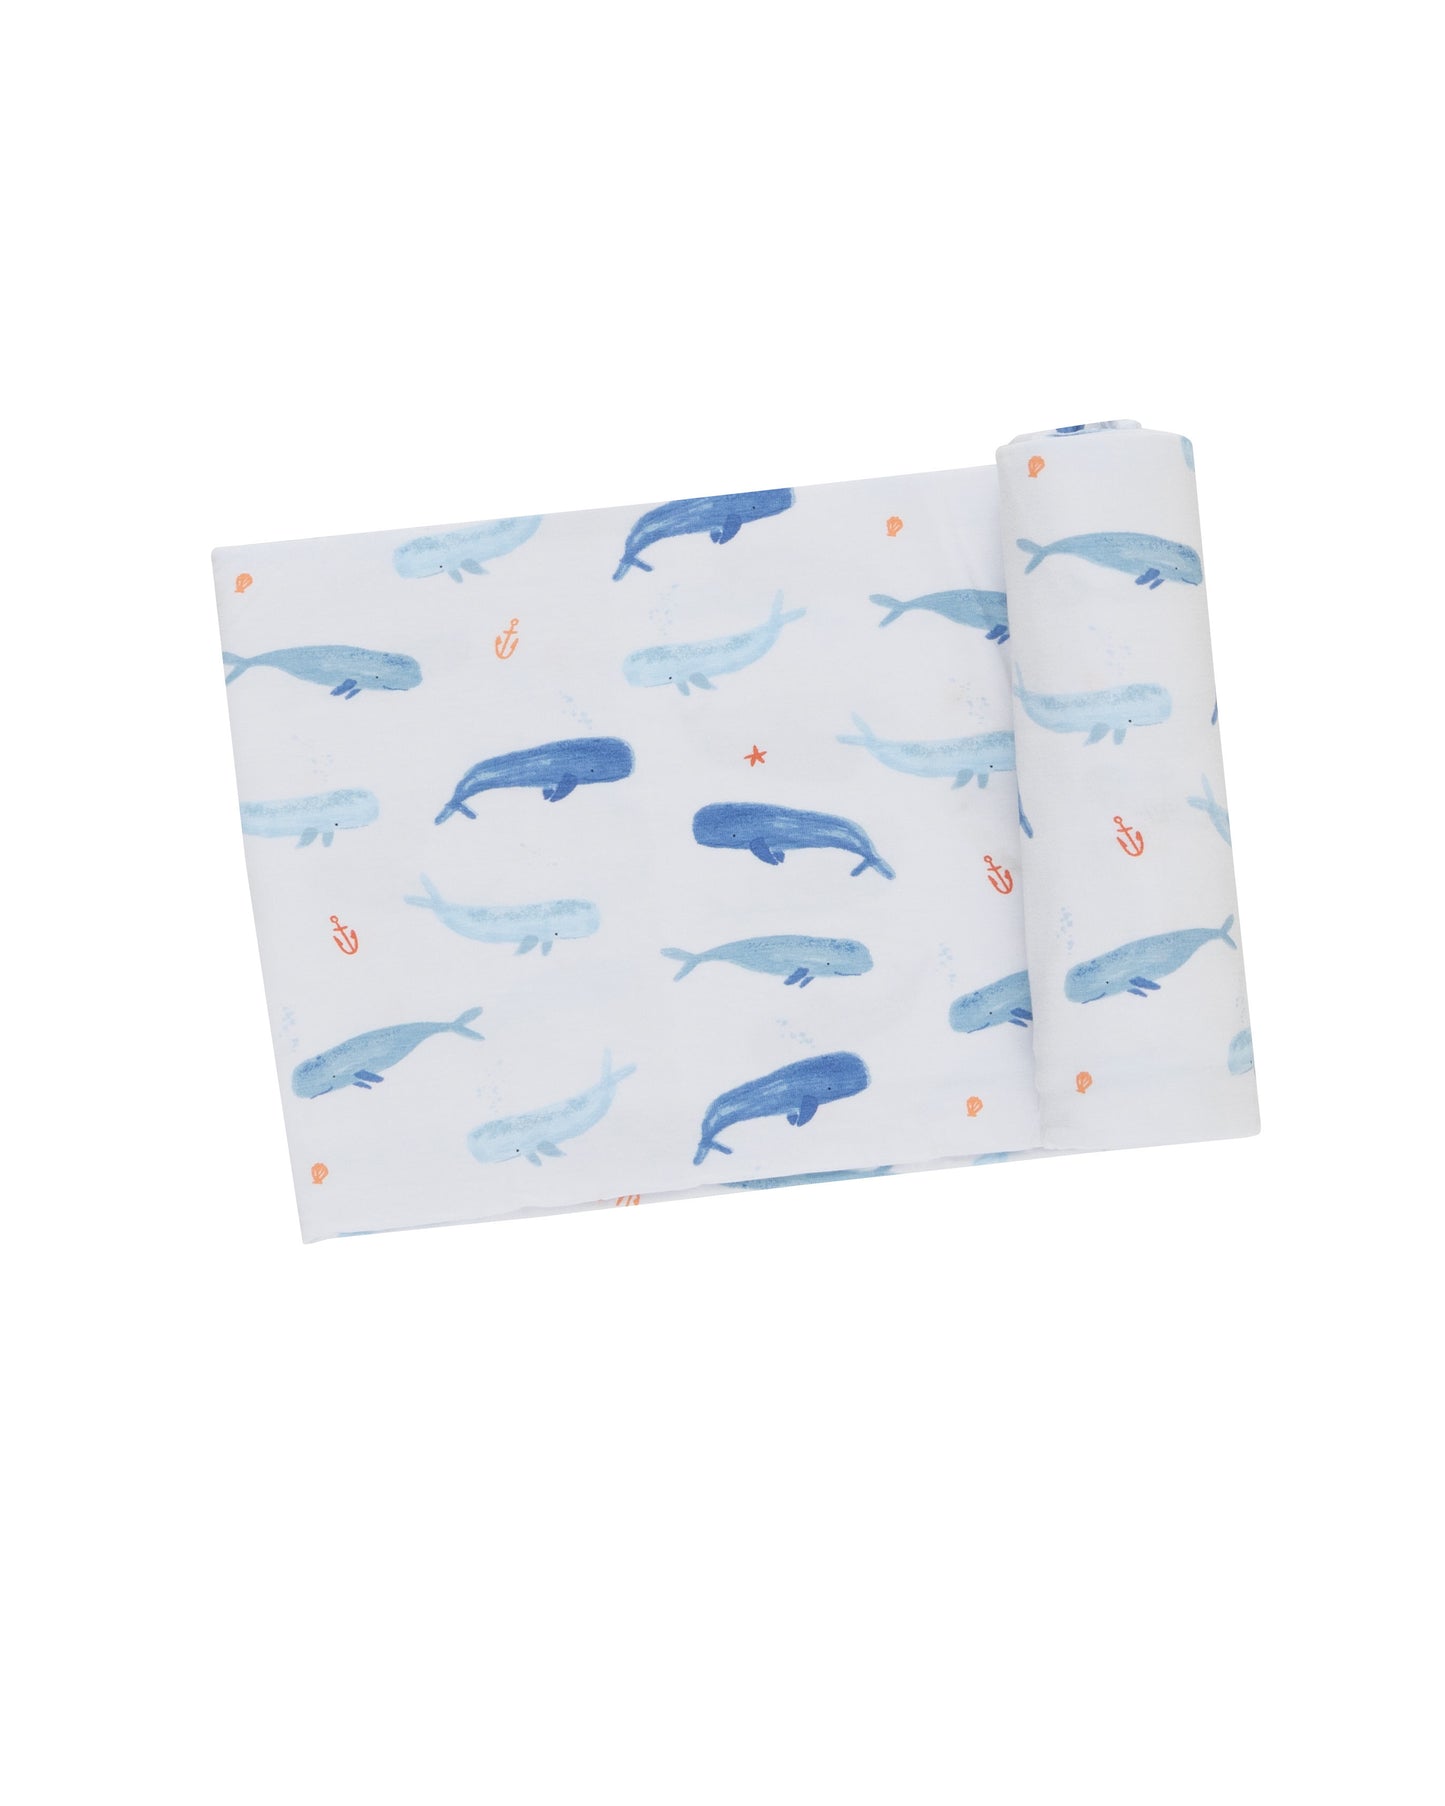 Whale Hello There Swaddle by Angel Dear